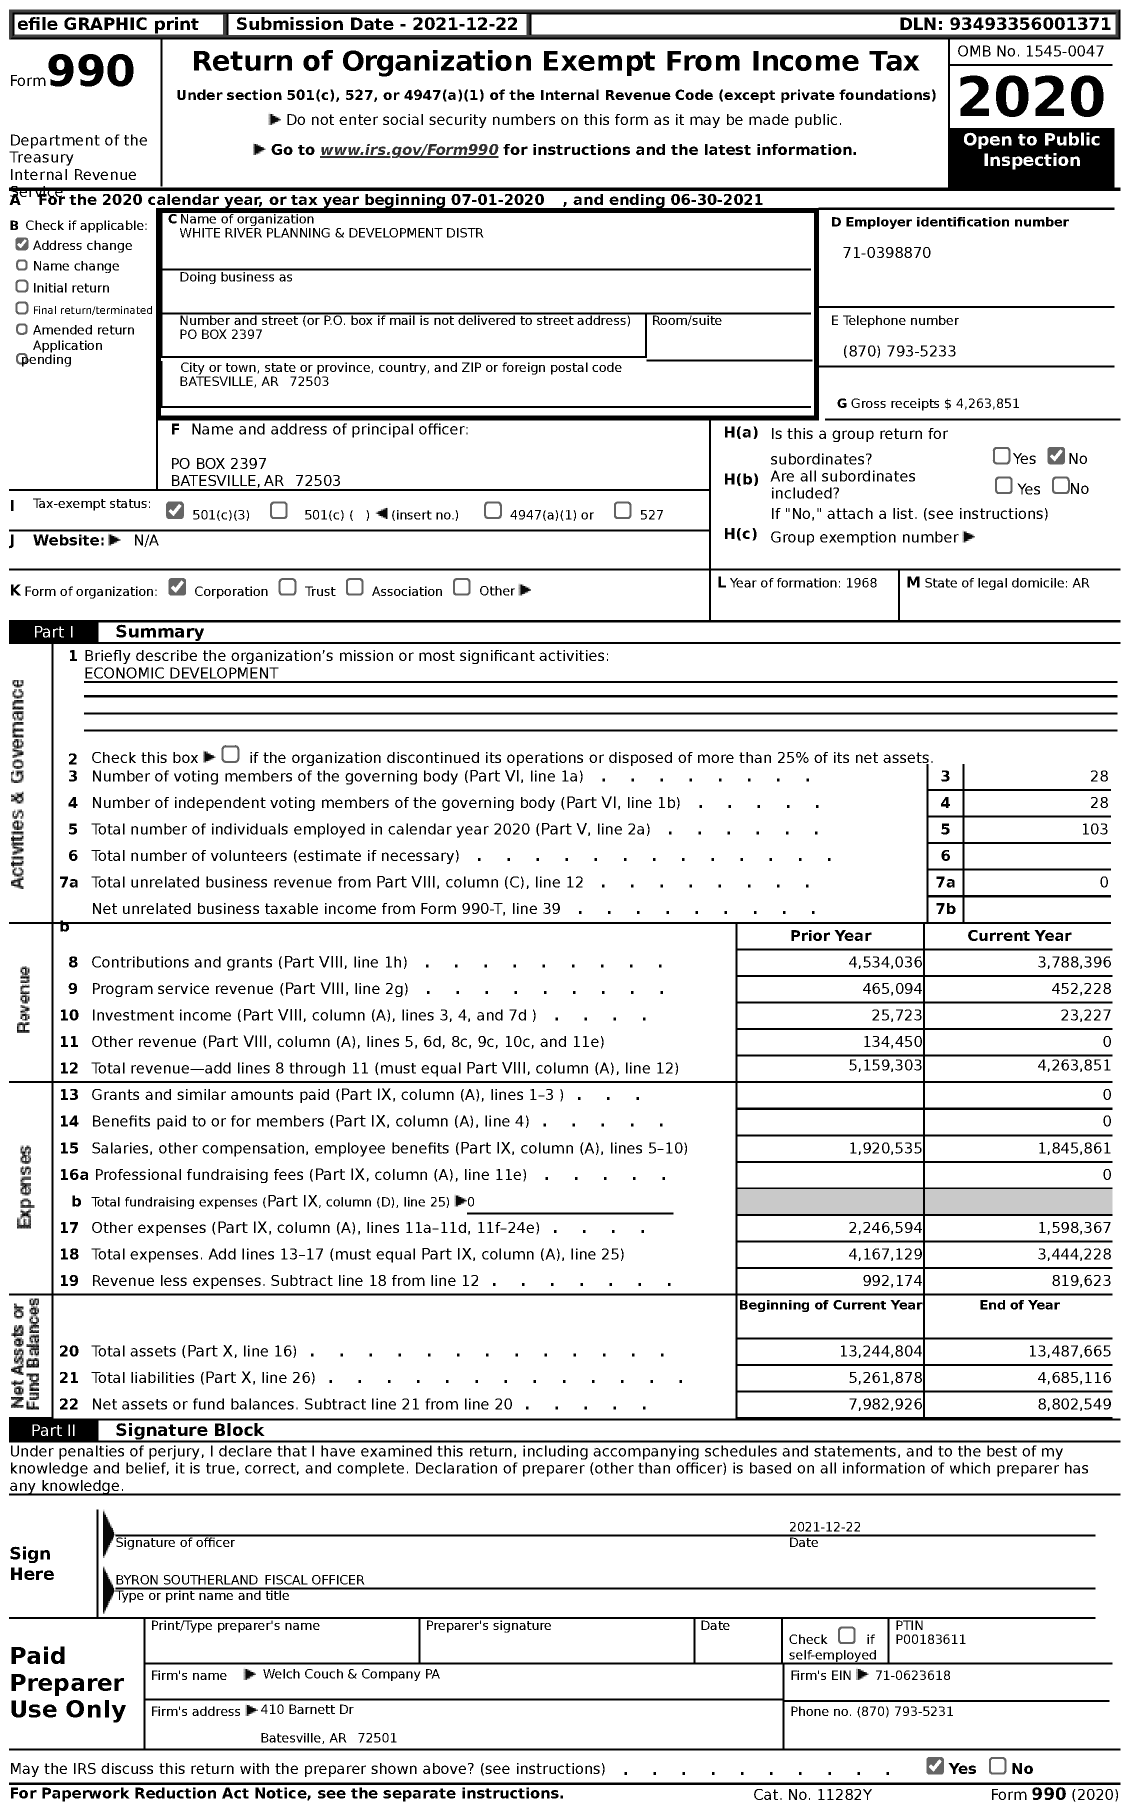 Image of first page of 2020 Form 990 for White River Planning & Development Distribution (WRPDD)